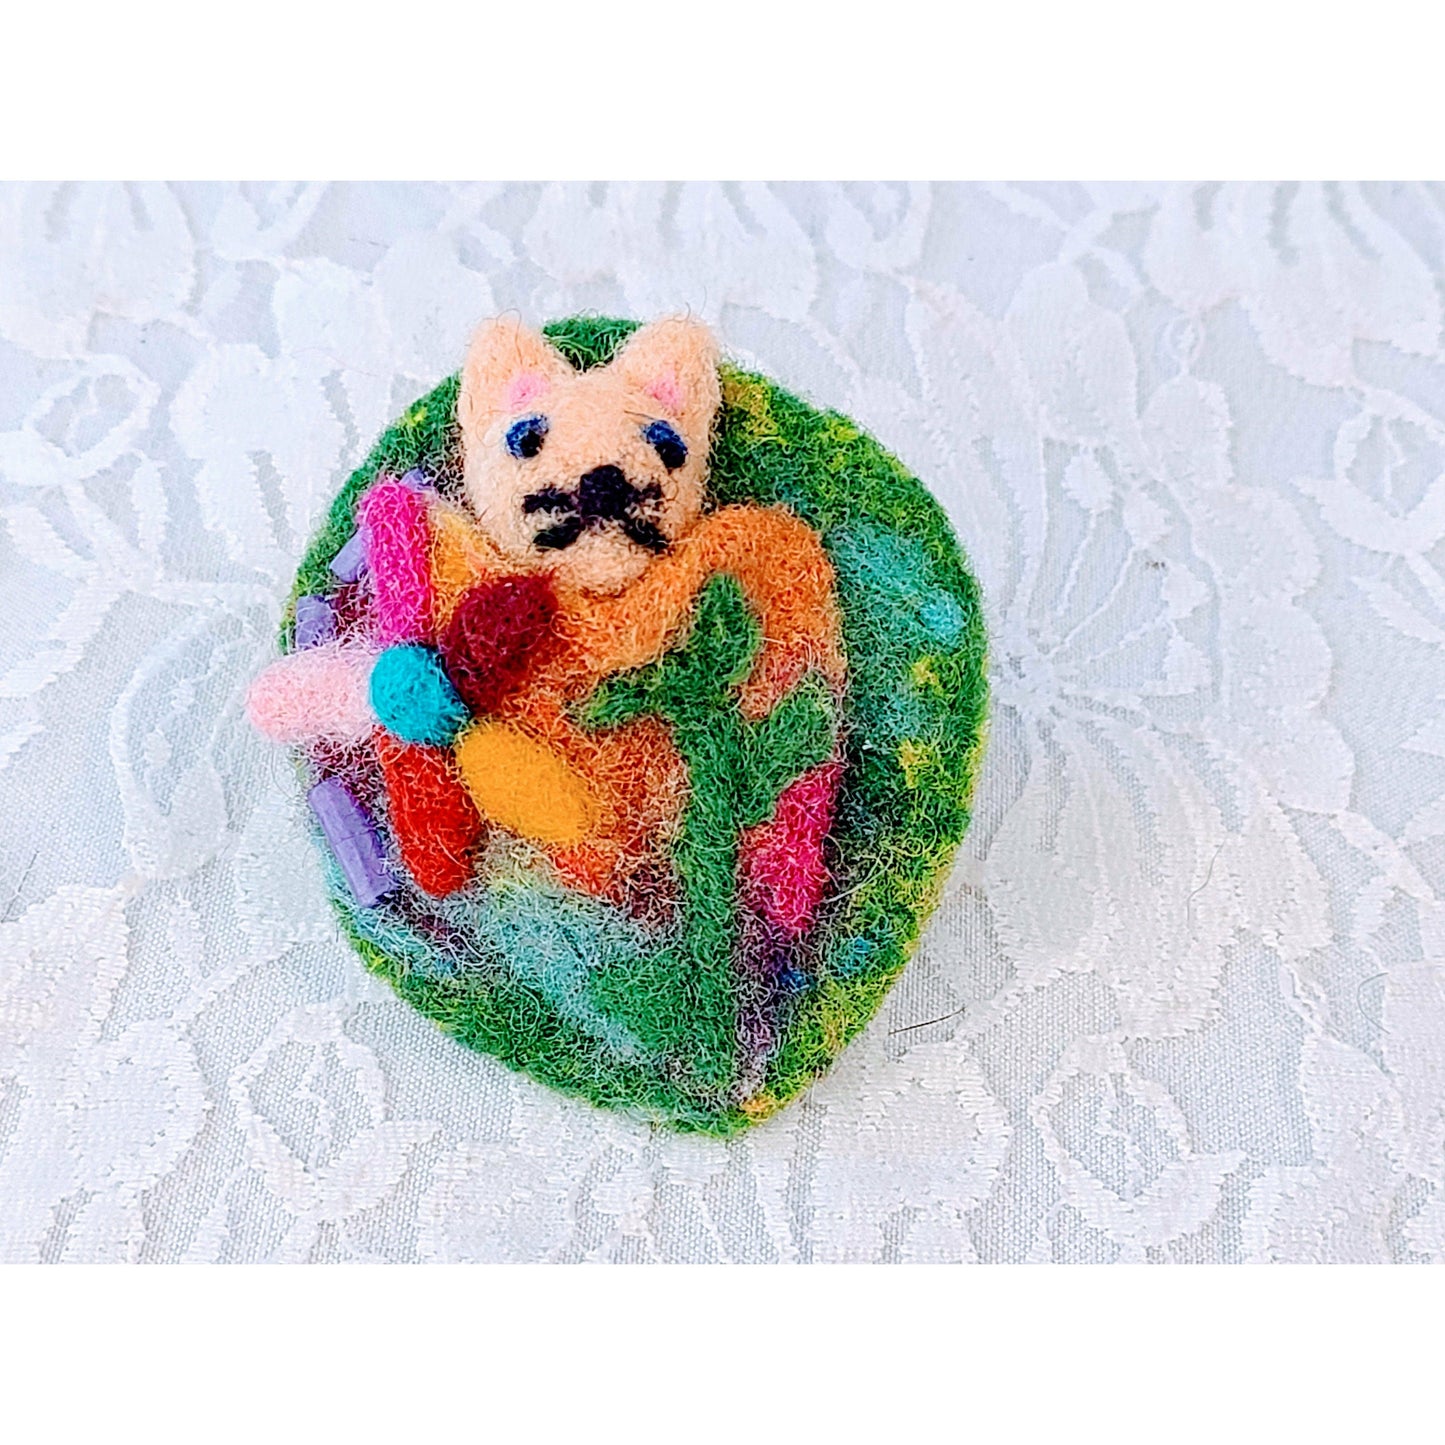 Handmade Set of 3 Felted Brooches Pins ~ Mixed Media Jewelry ~ Unique OOAK Brooch Pin Lapel ~ Christmas Gifts ~ Stocking Stuffers